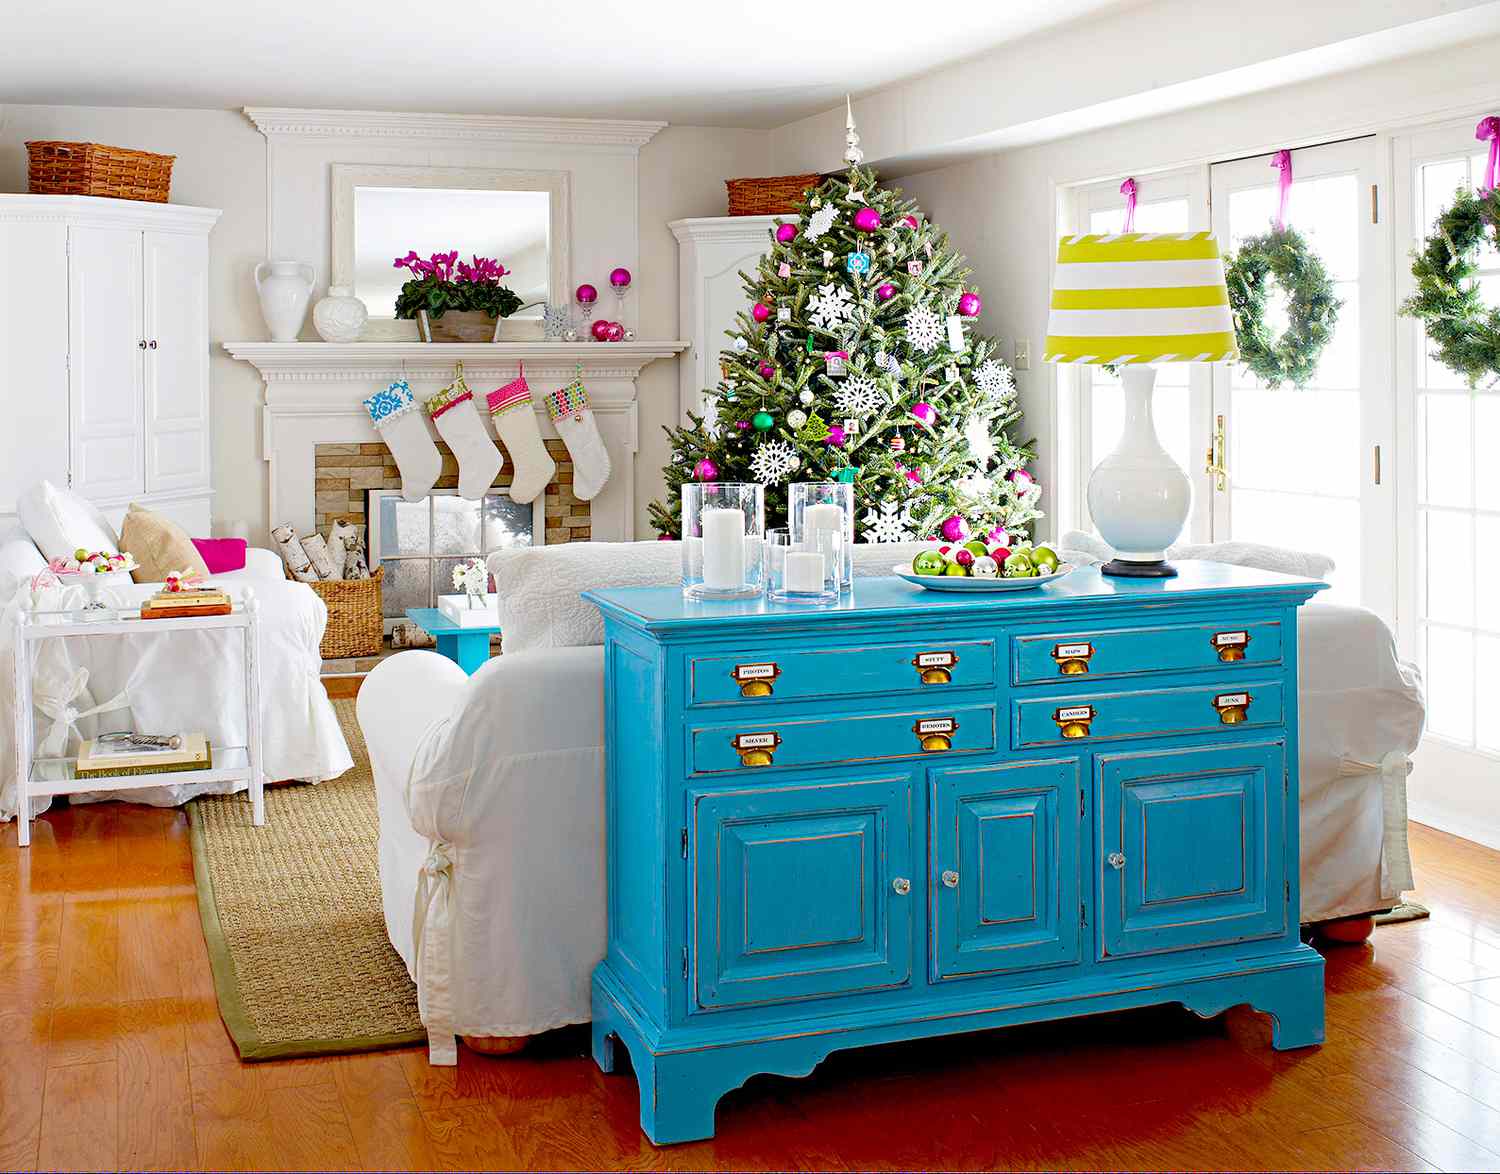 Living room with Christmas tree and blue cabinet